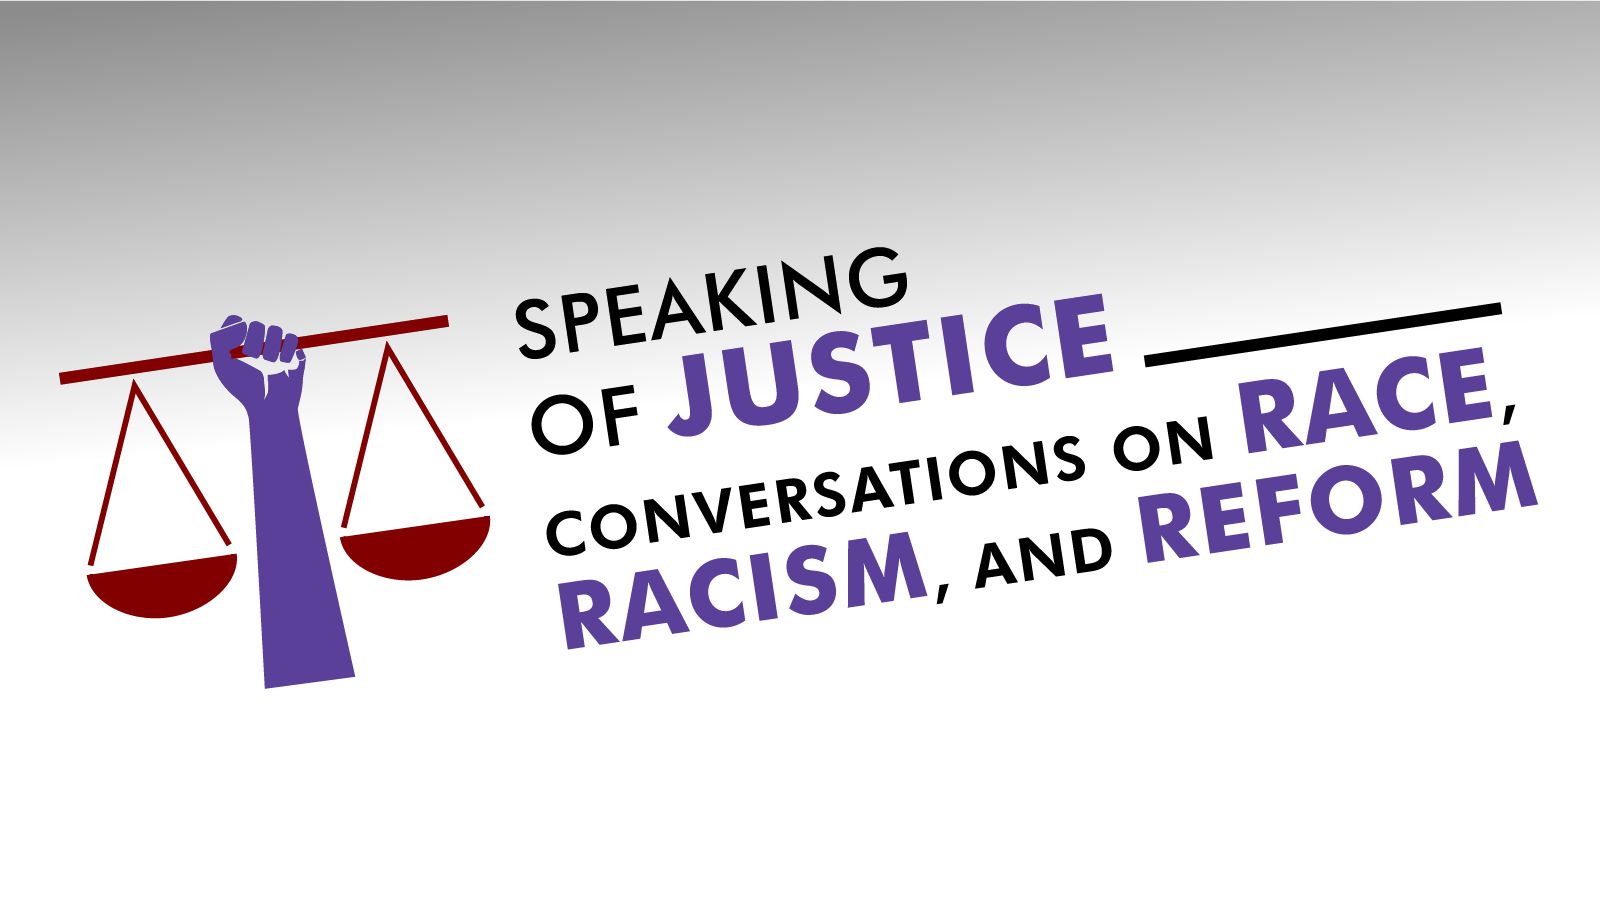 Speaking of Justice Conversations on Race, Racism, and Reform